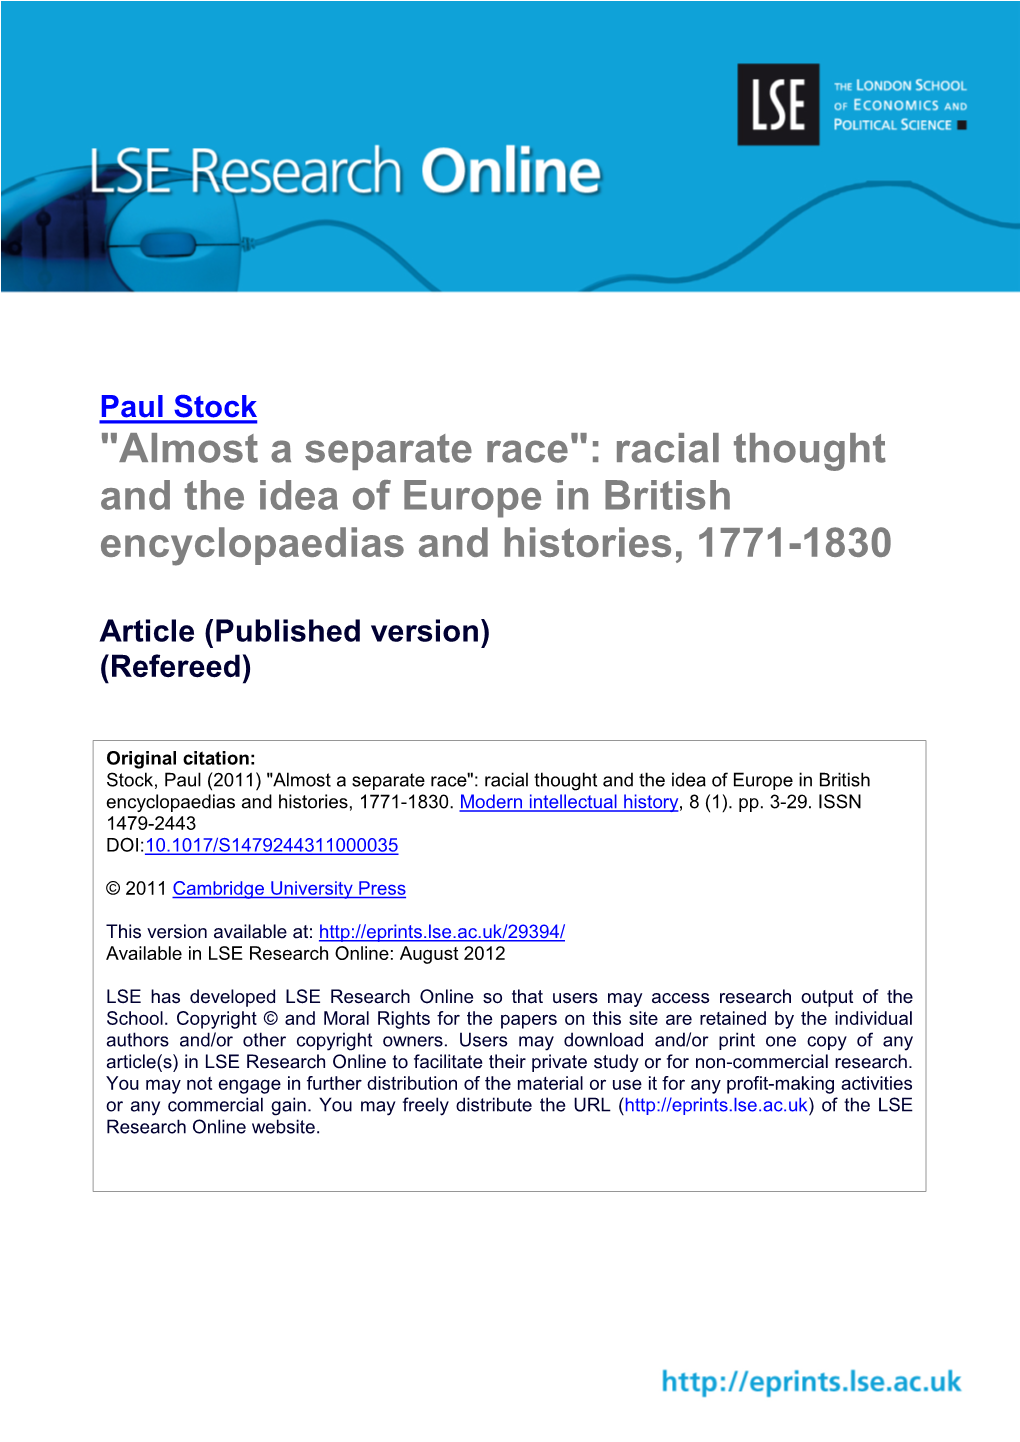 "Almost a Separate Race": Racial Thought and the Idea of Europe in British Encyclopaedias and Histories, 1771-1830